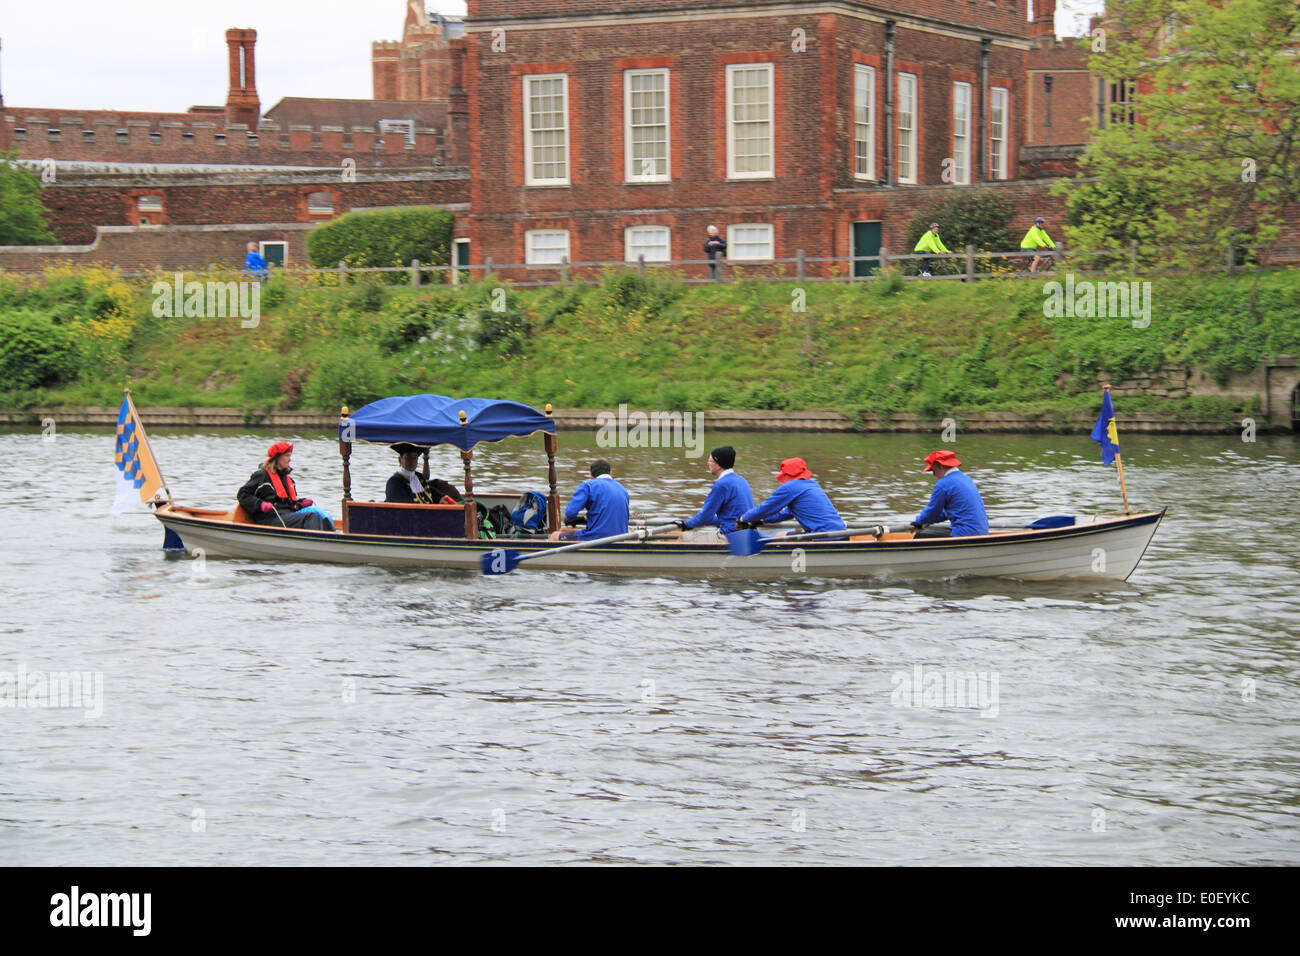 Tudor Pull.  Hampton Court Palace, East Molesey, Surrey, UK. 11th May, 2014. Annual traditional rowing event between the Historic Royal Palaces of Hampton Court and the Tower of London. Thames cutters, here crewed by the Worshipful Company of Scientific Instrument Makers, escort the Royal Barge Gloriana as she delivers a 'Stela' to the Governor of the Tower. This 'Stela' is a piece of ancient water pipe made from a hollowed tree trunk which stands on a base of timber from the old Richmond Lock and bears the coat of arms of the Worshipful Company of Watermen and Lightermen. Stock Photo